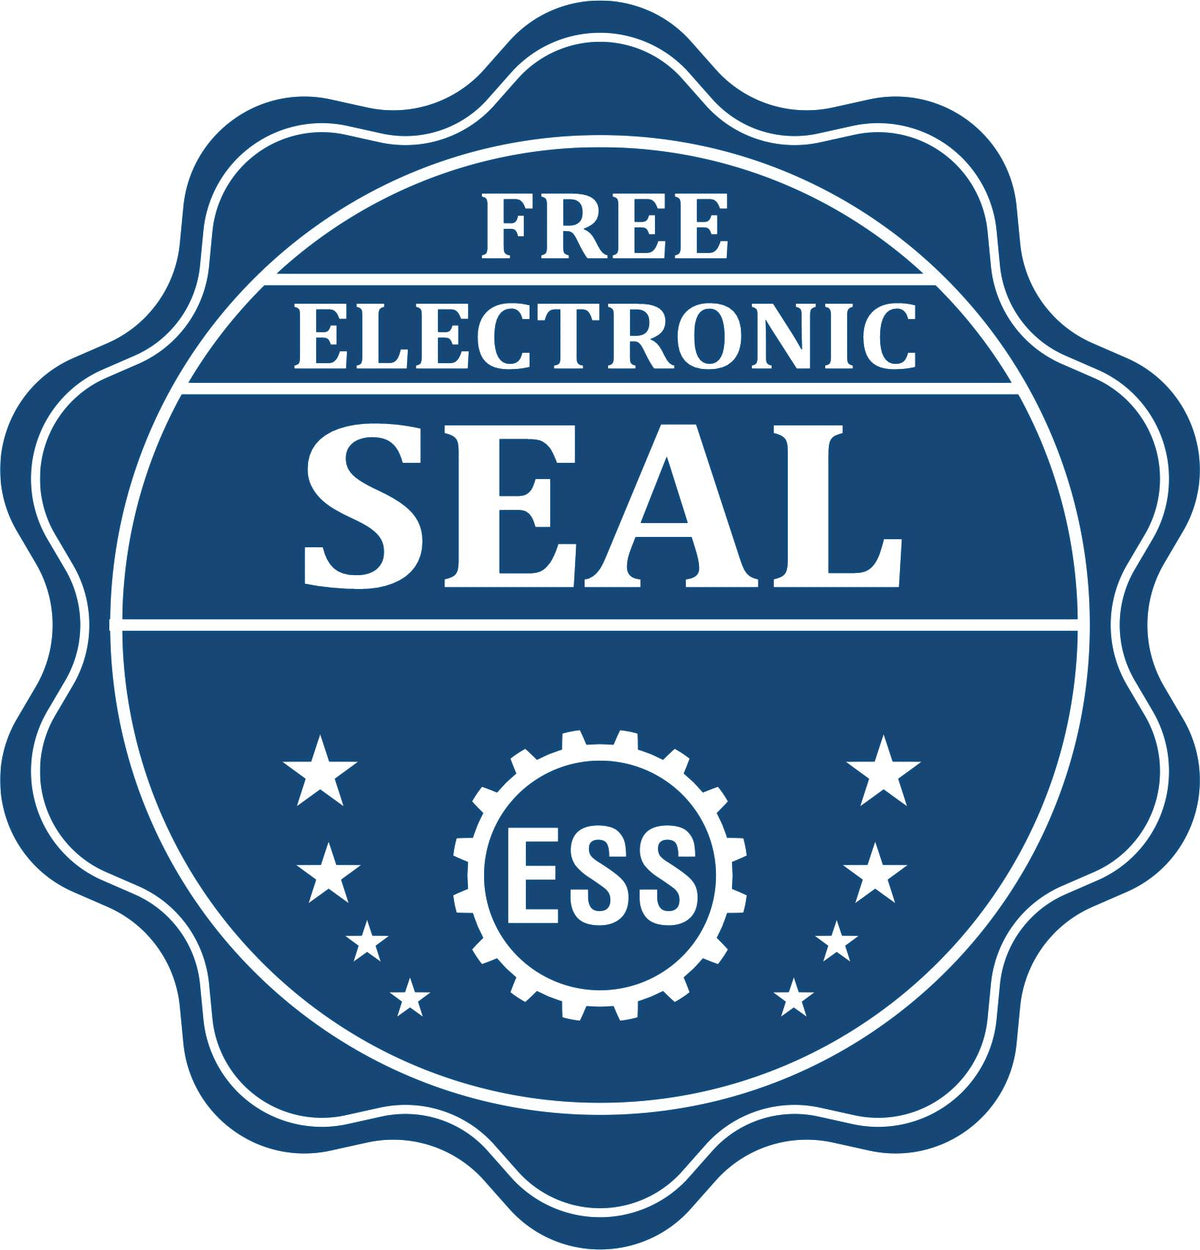 A badge showing a free electronic seal for the Heavy Duty Cast Iron Guam Architect Embosser with stars and the ESS gear on the emblem.